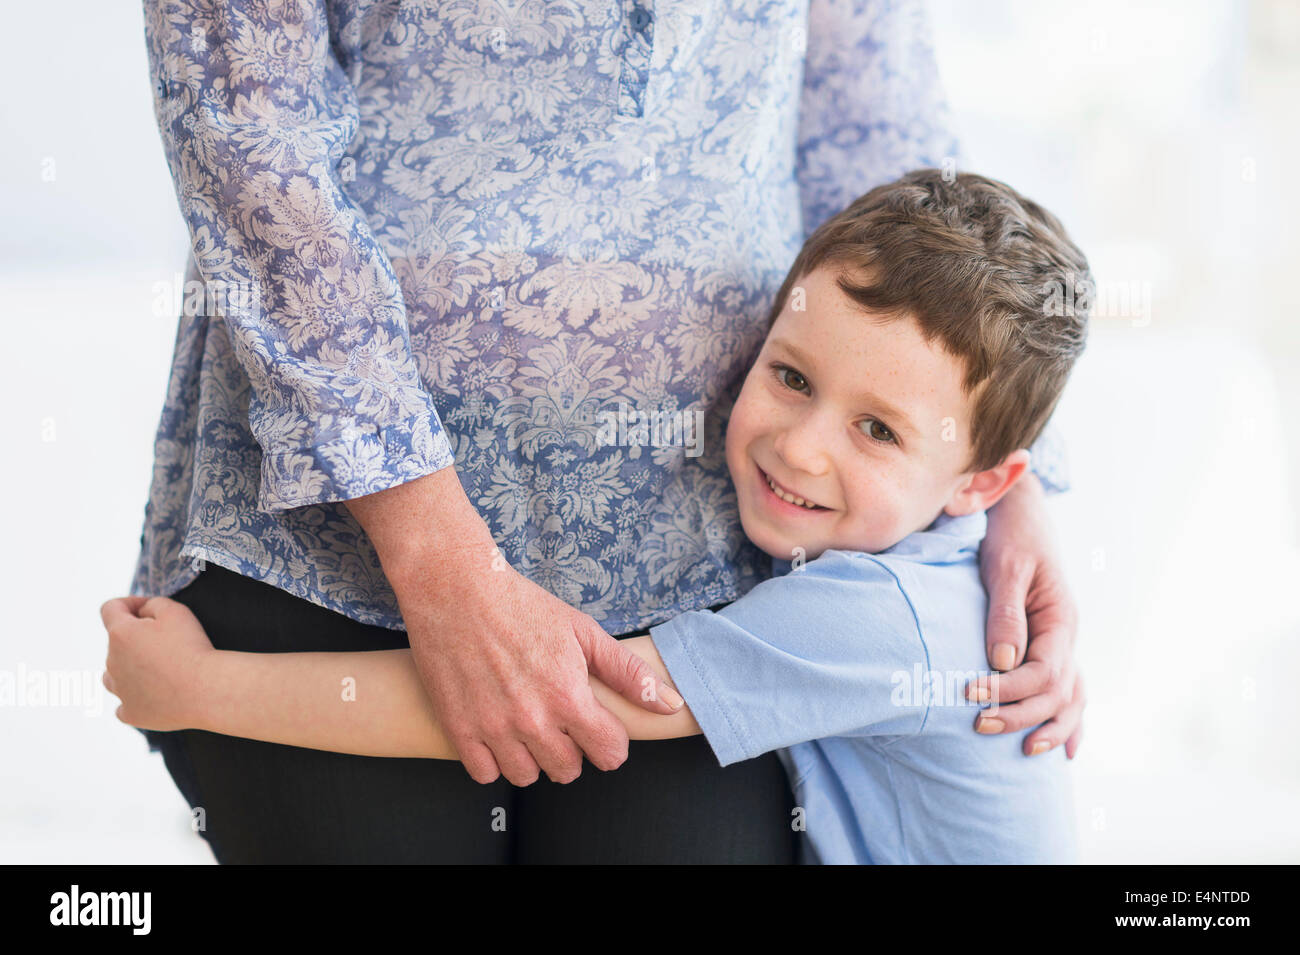 Boy (6-7) embracing mother Stock Photo